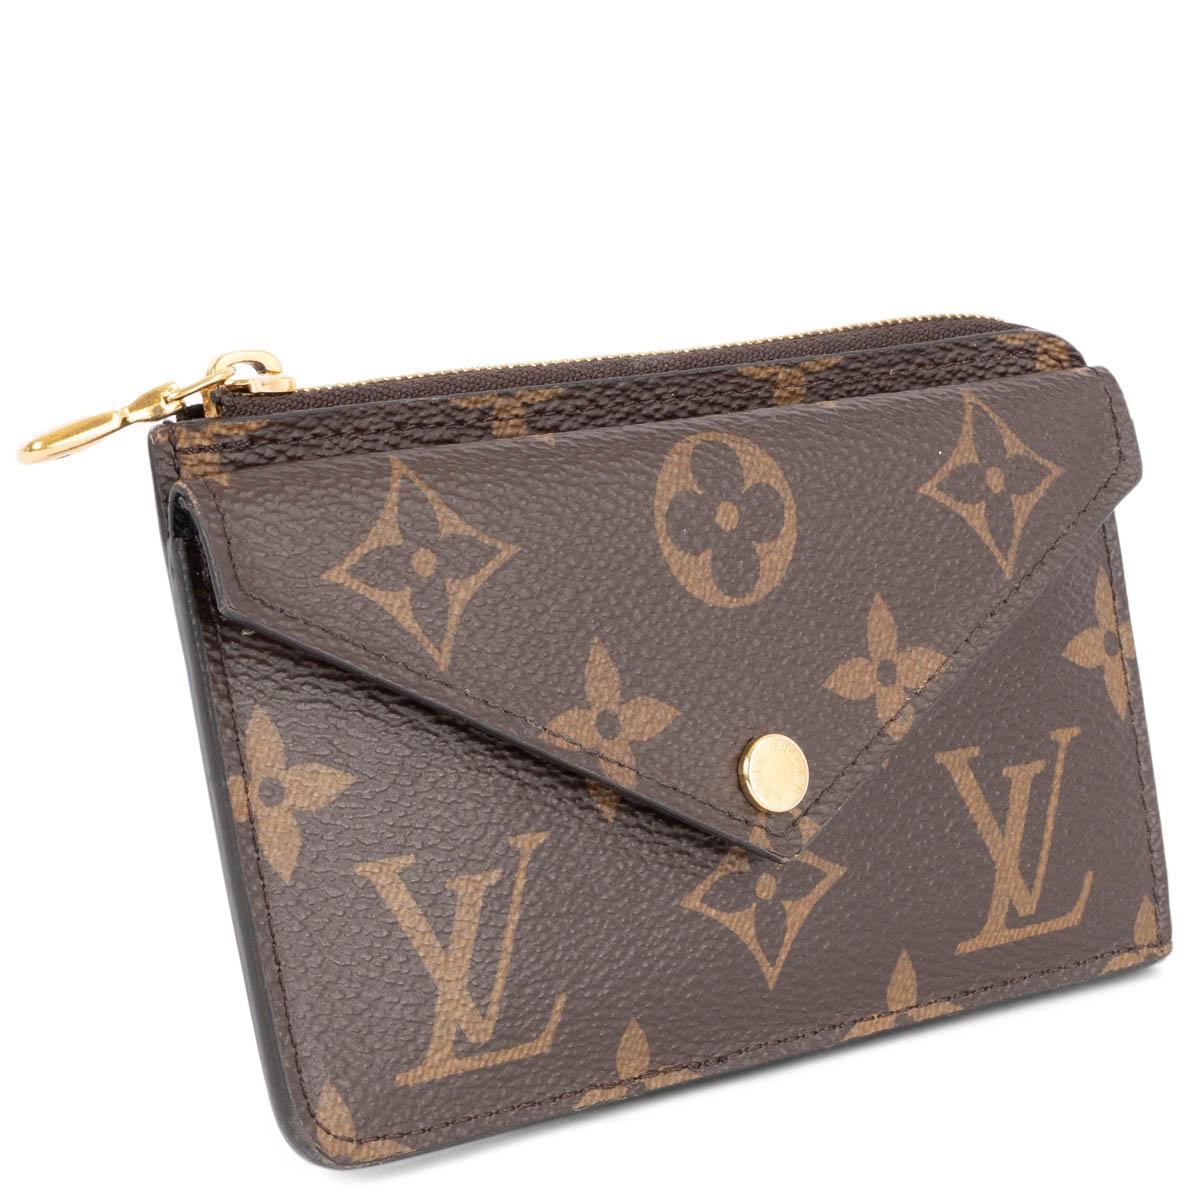 100% authentic Louis Vuitton Recto Verso card & key holder in brown monogram canvas featuring gold-tone hardware. Has been carried and is in excellent condition. 

Measurements
Model	M69431
Width	14cm (5.5in)
Height	8cm (3.1in)
Depth	3cm